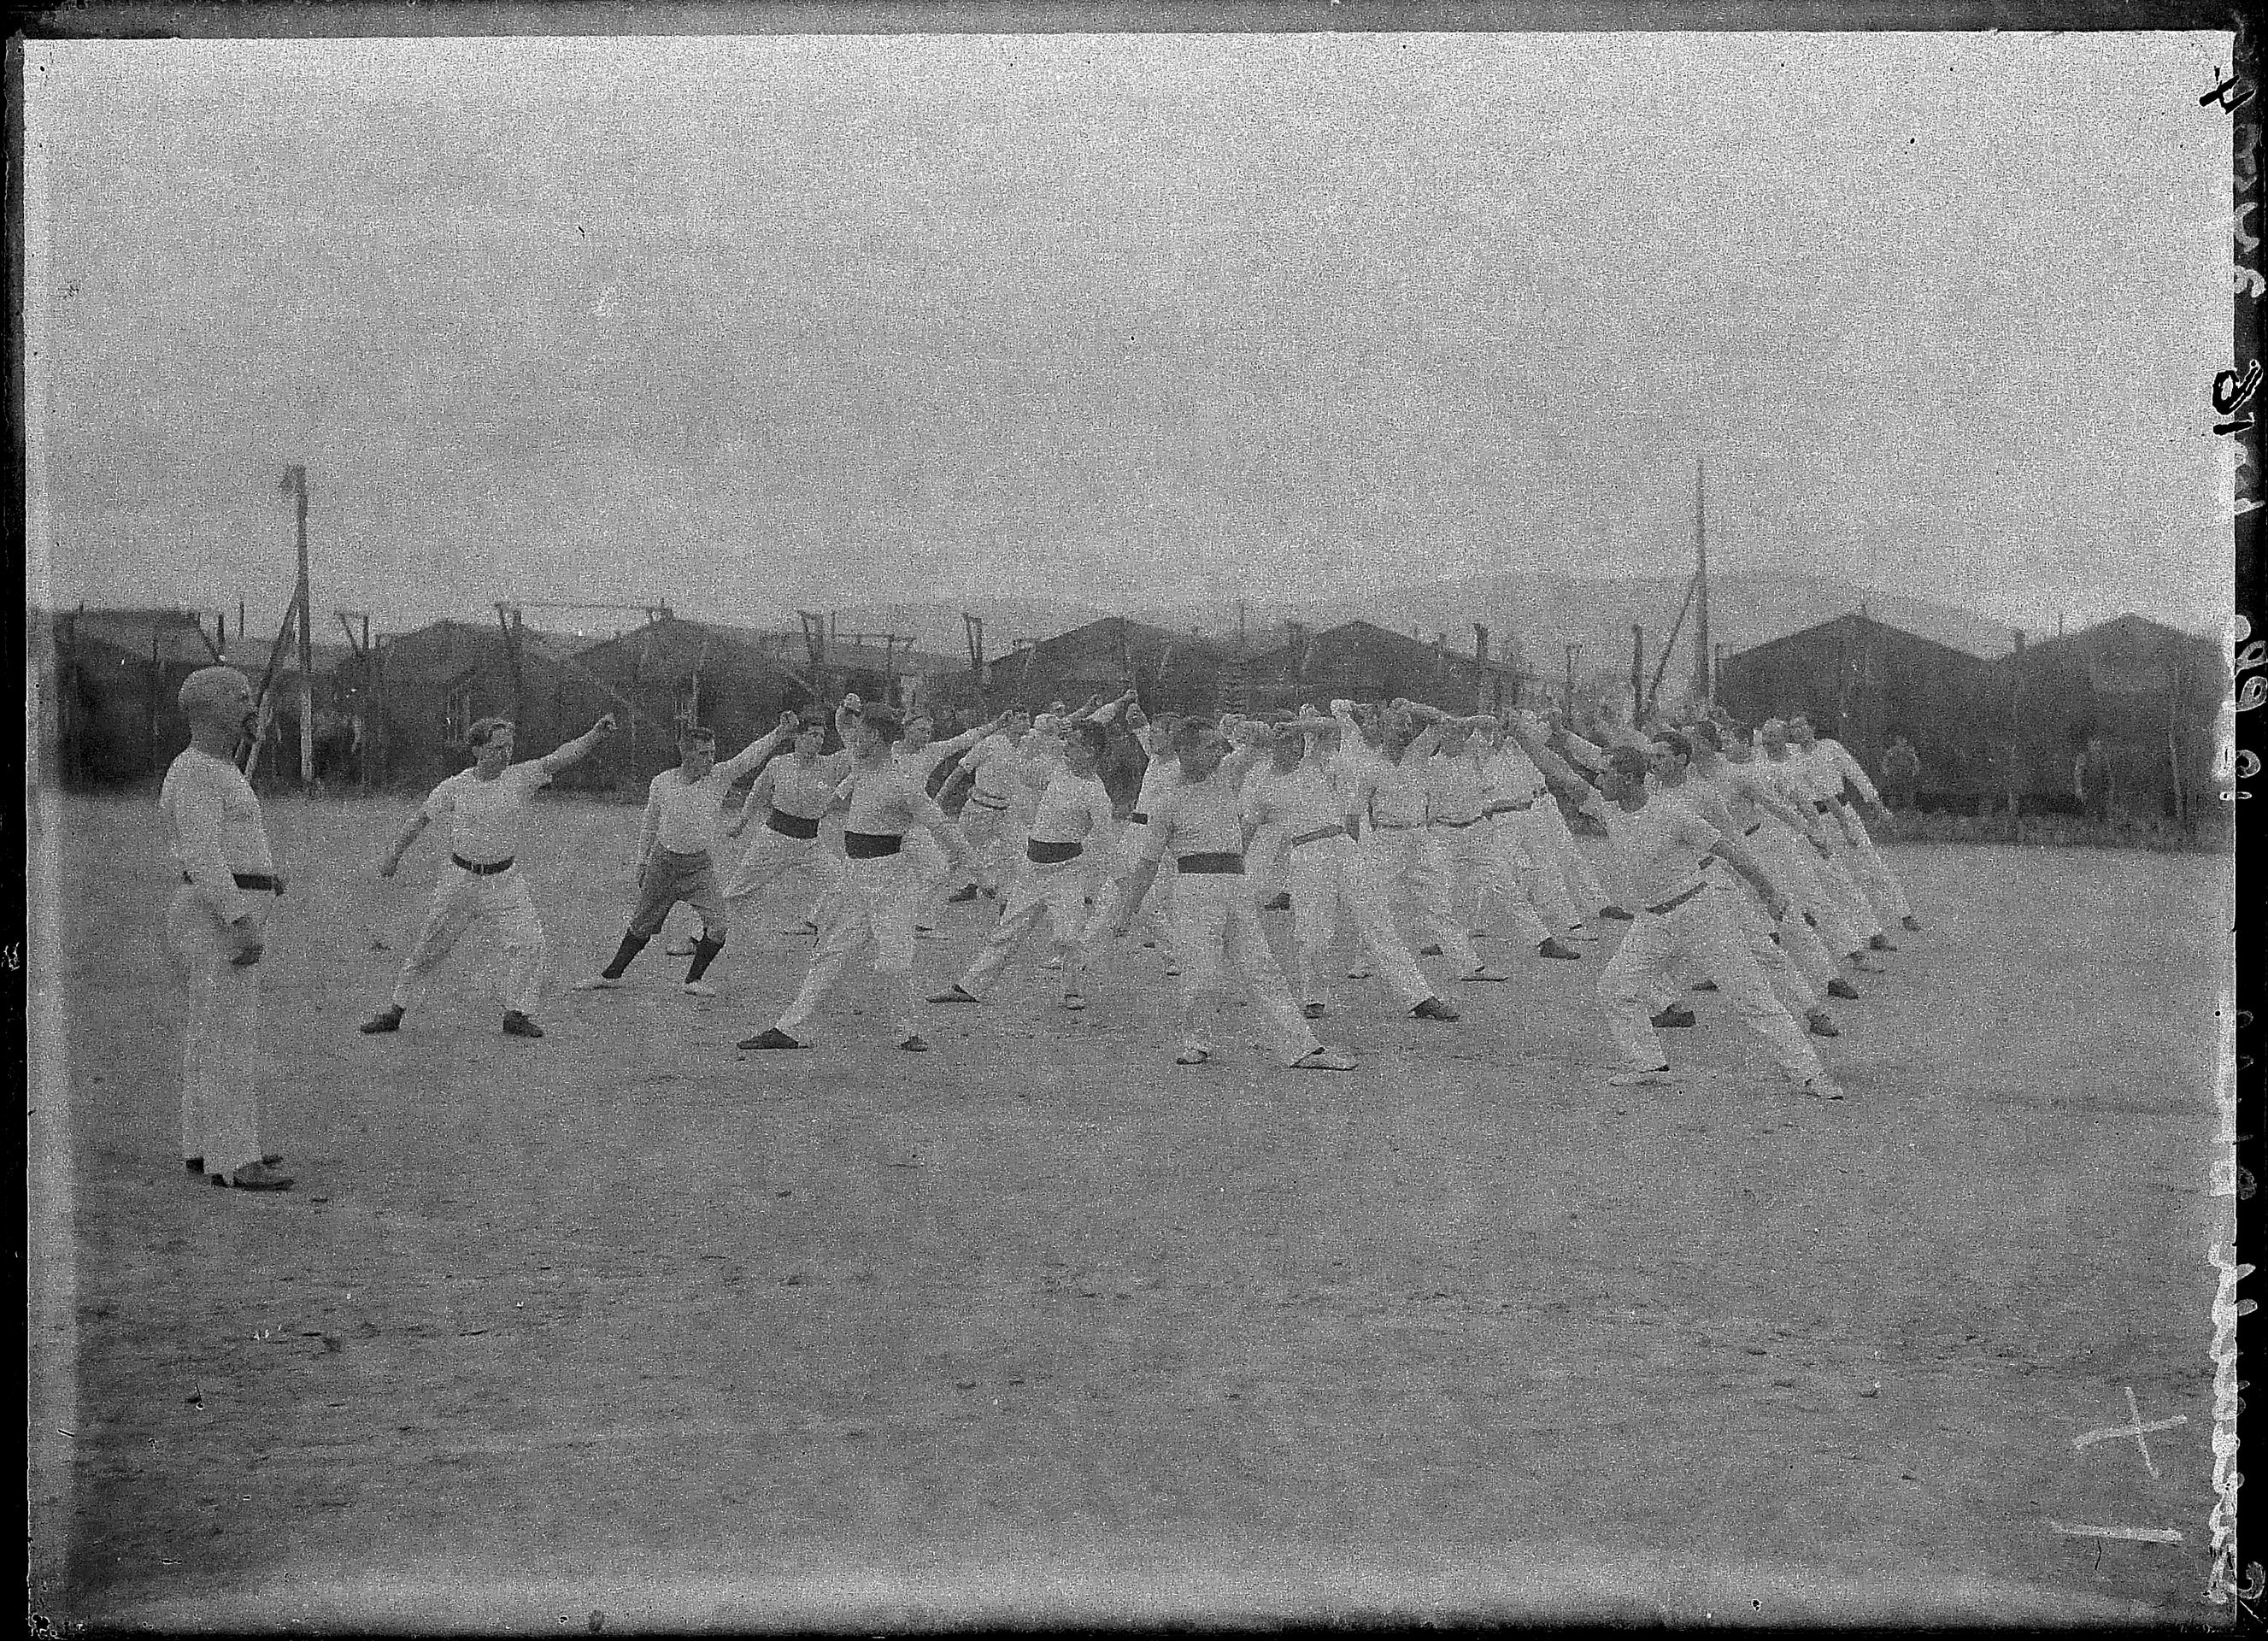 First World War Internee Physical Exercise Group (Huts and Wire in  background), Knockaloe Camp, Isle of Man - Photographic Archive - iMuseum